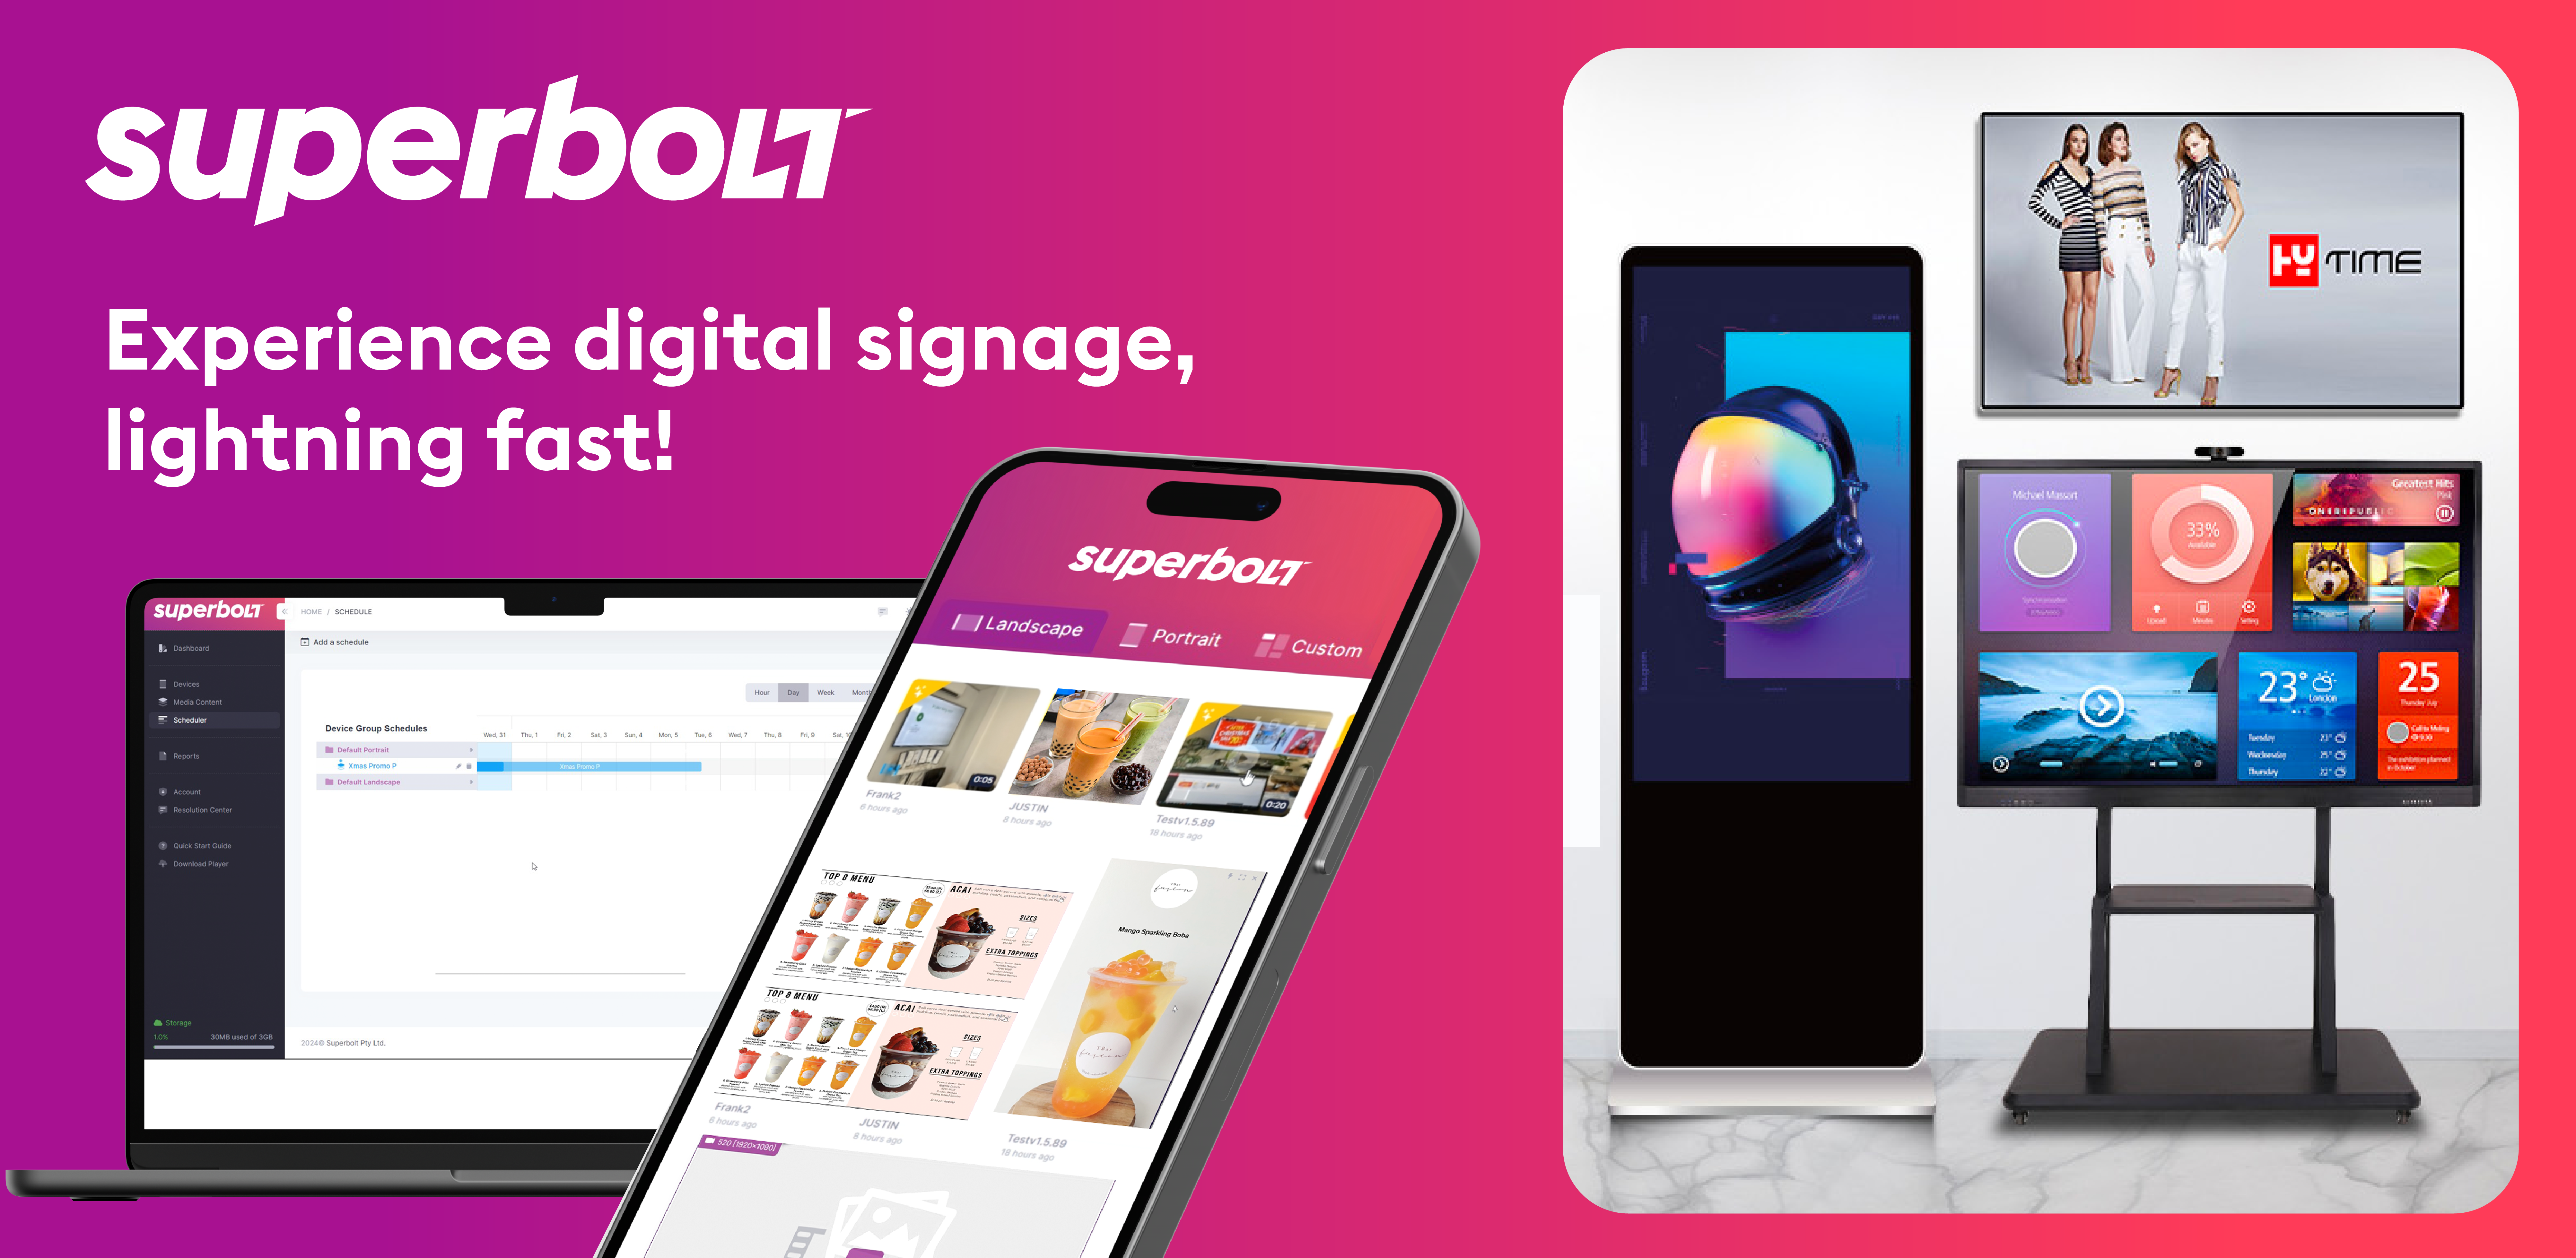 The future of digital signage starts here. Whether updating one screen or scheduling content for thousands of screens worldwide.

Superbolt delivers features and benefits with people in mind, not just technology.
